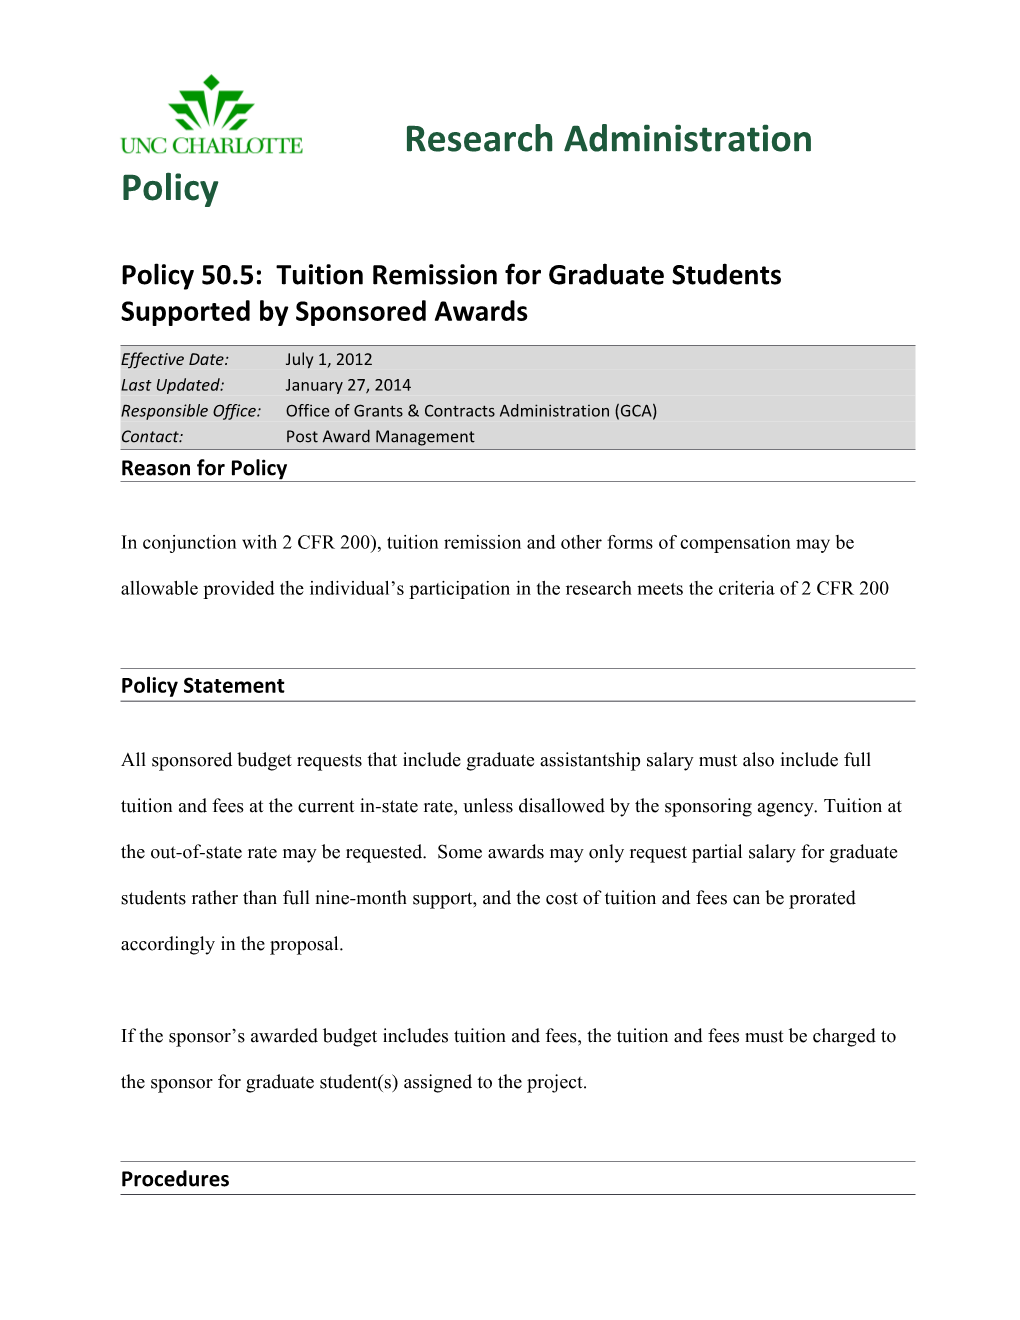 Policy 50.5: Tuition Remission for Graduate Students Supported by Sponsored Awards